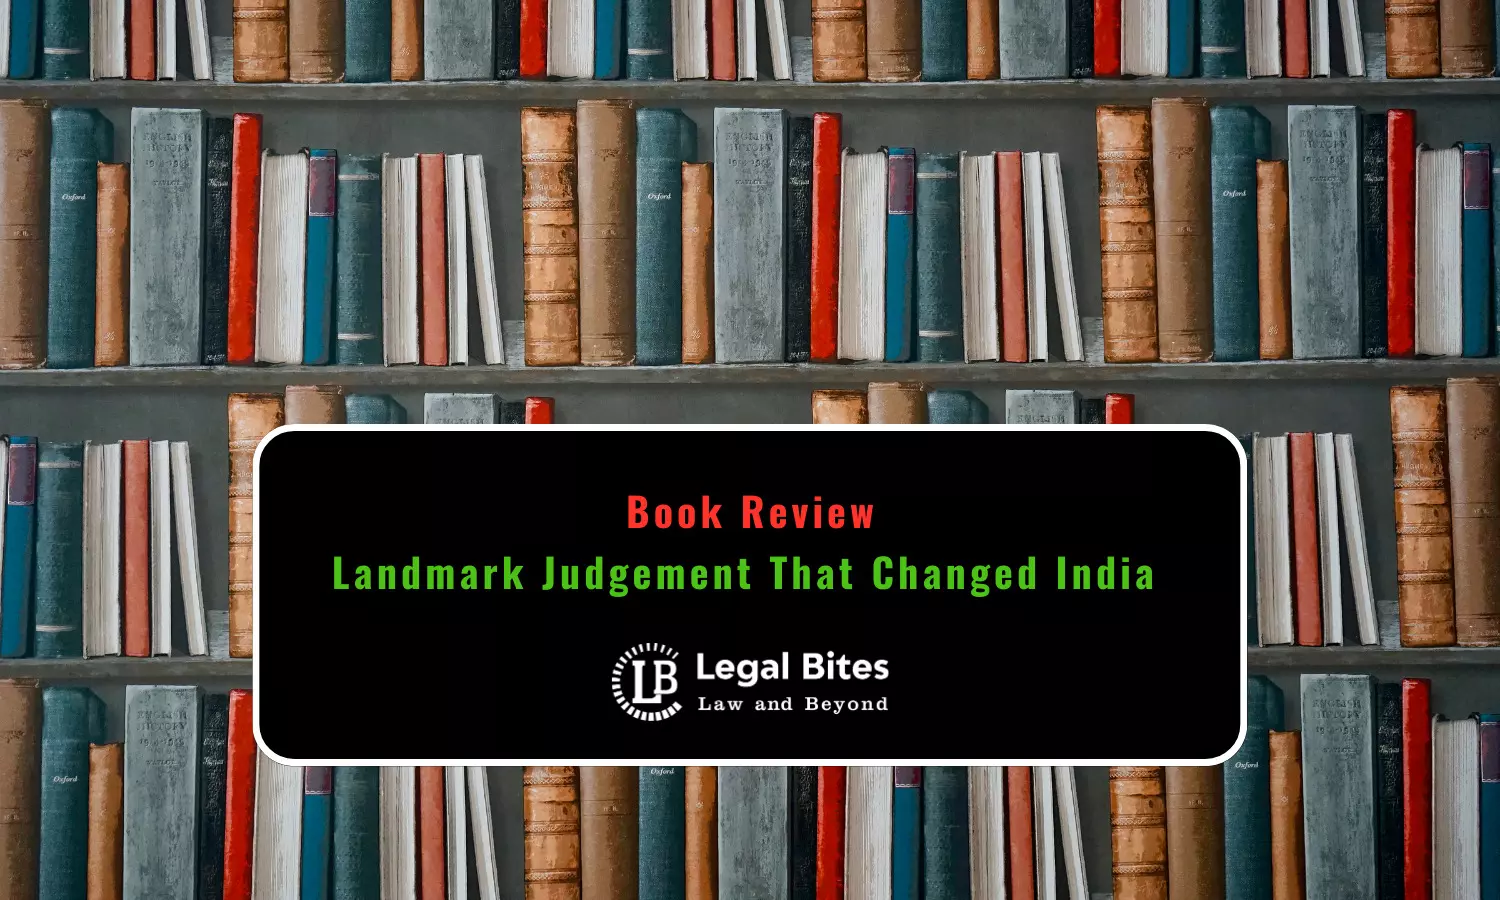 Book Review- Landmark Judgement That Changed India By Justice Asok Kumar Ganguly